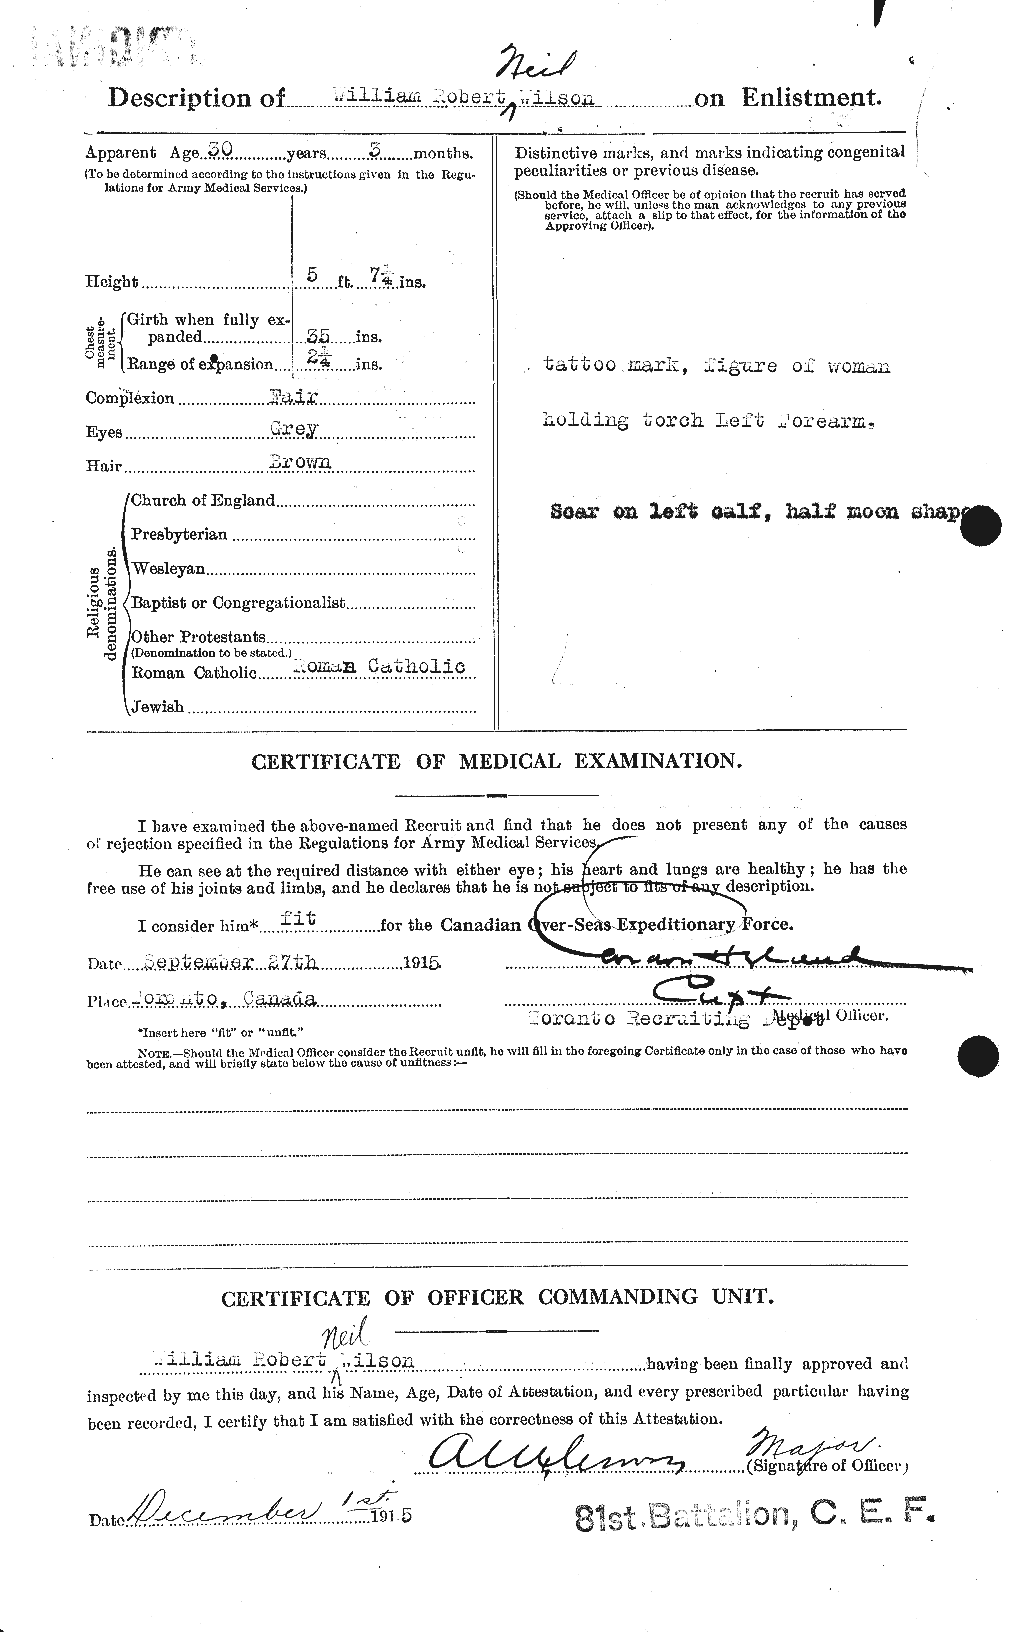 Personnel Records of the First World War - CEF 684100b